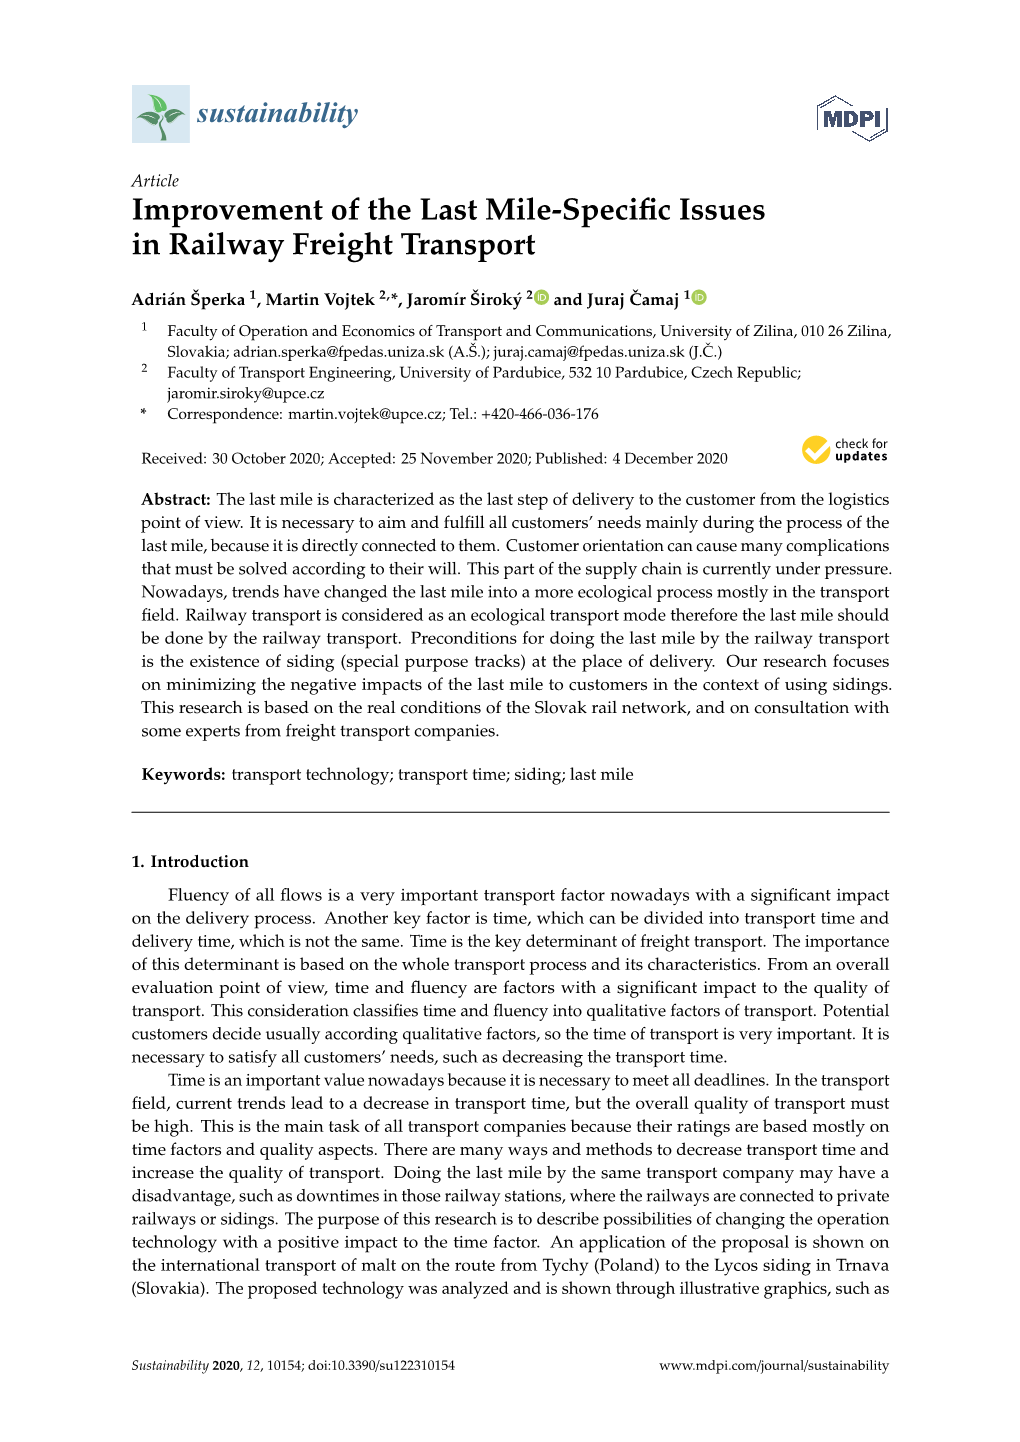 Improvement of the Last Mile-Specific Issues in Railway Freight Transport